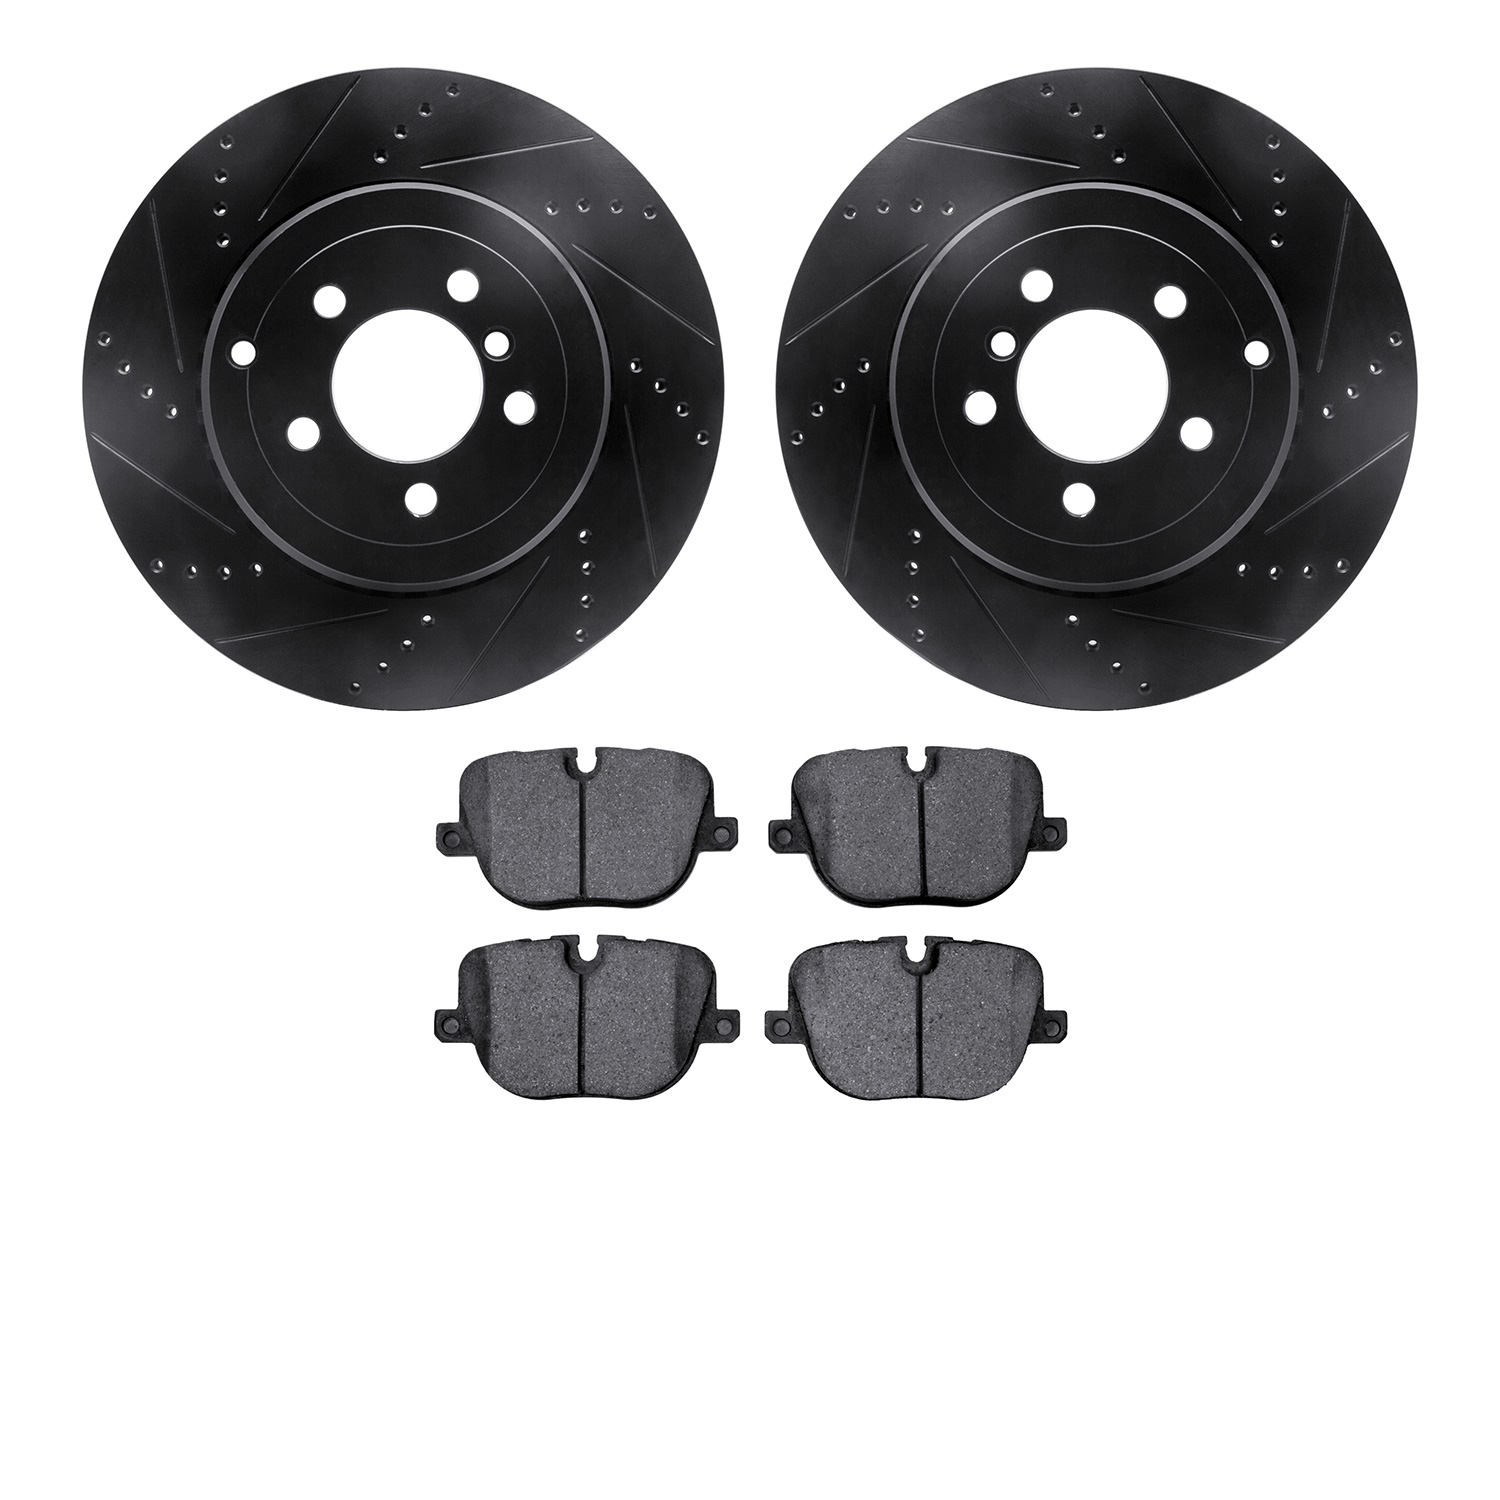 8302-11023 Drilled/Slotted Brake Rotors with 3000-Series Ceramic Brake Pads Kit [Black], 2010-2012 Land Rover, Position: Rear